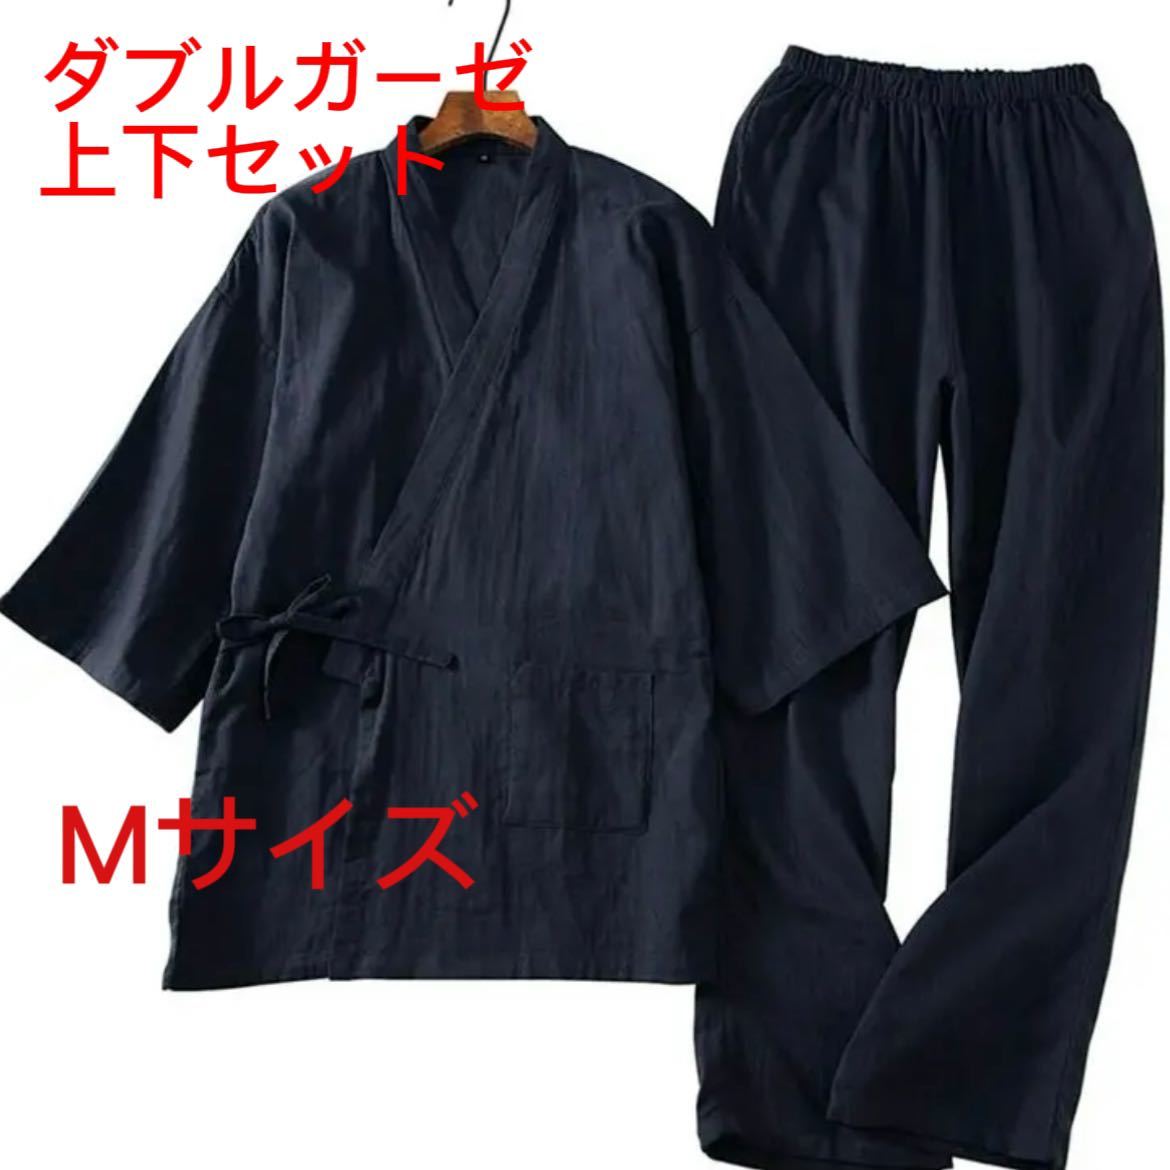  jinbei part shop put on top and bottom set M Samue .... men's unused tag attaching 